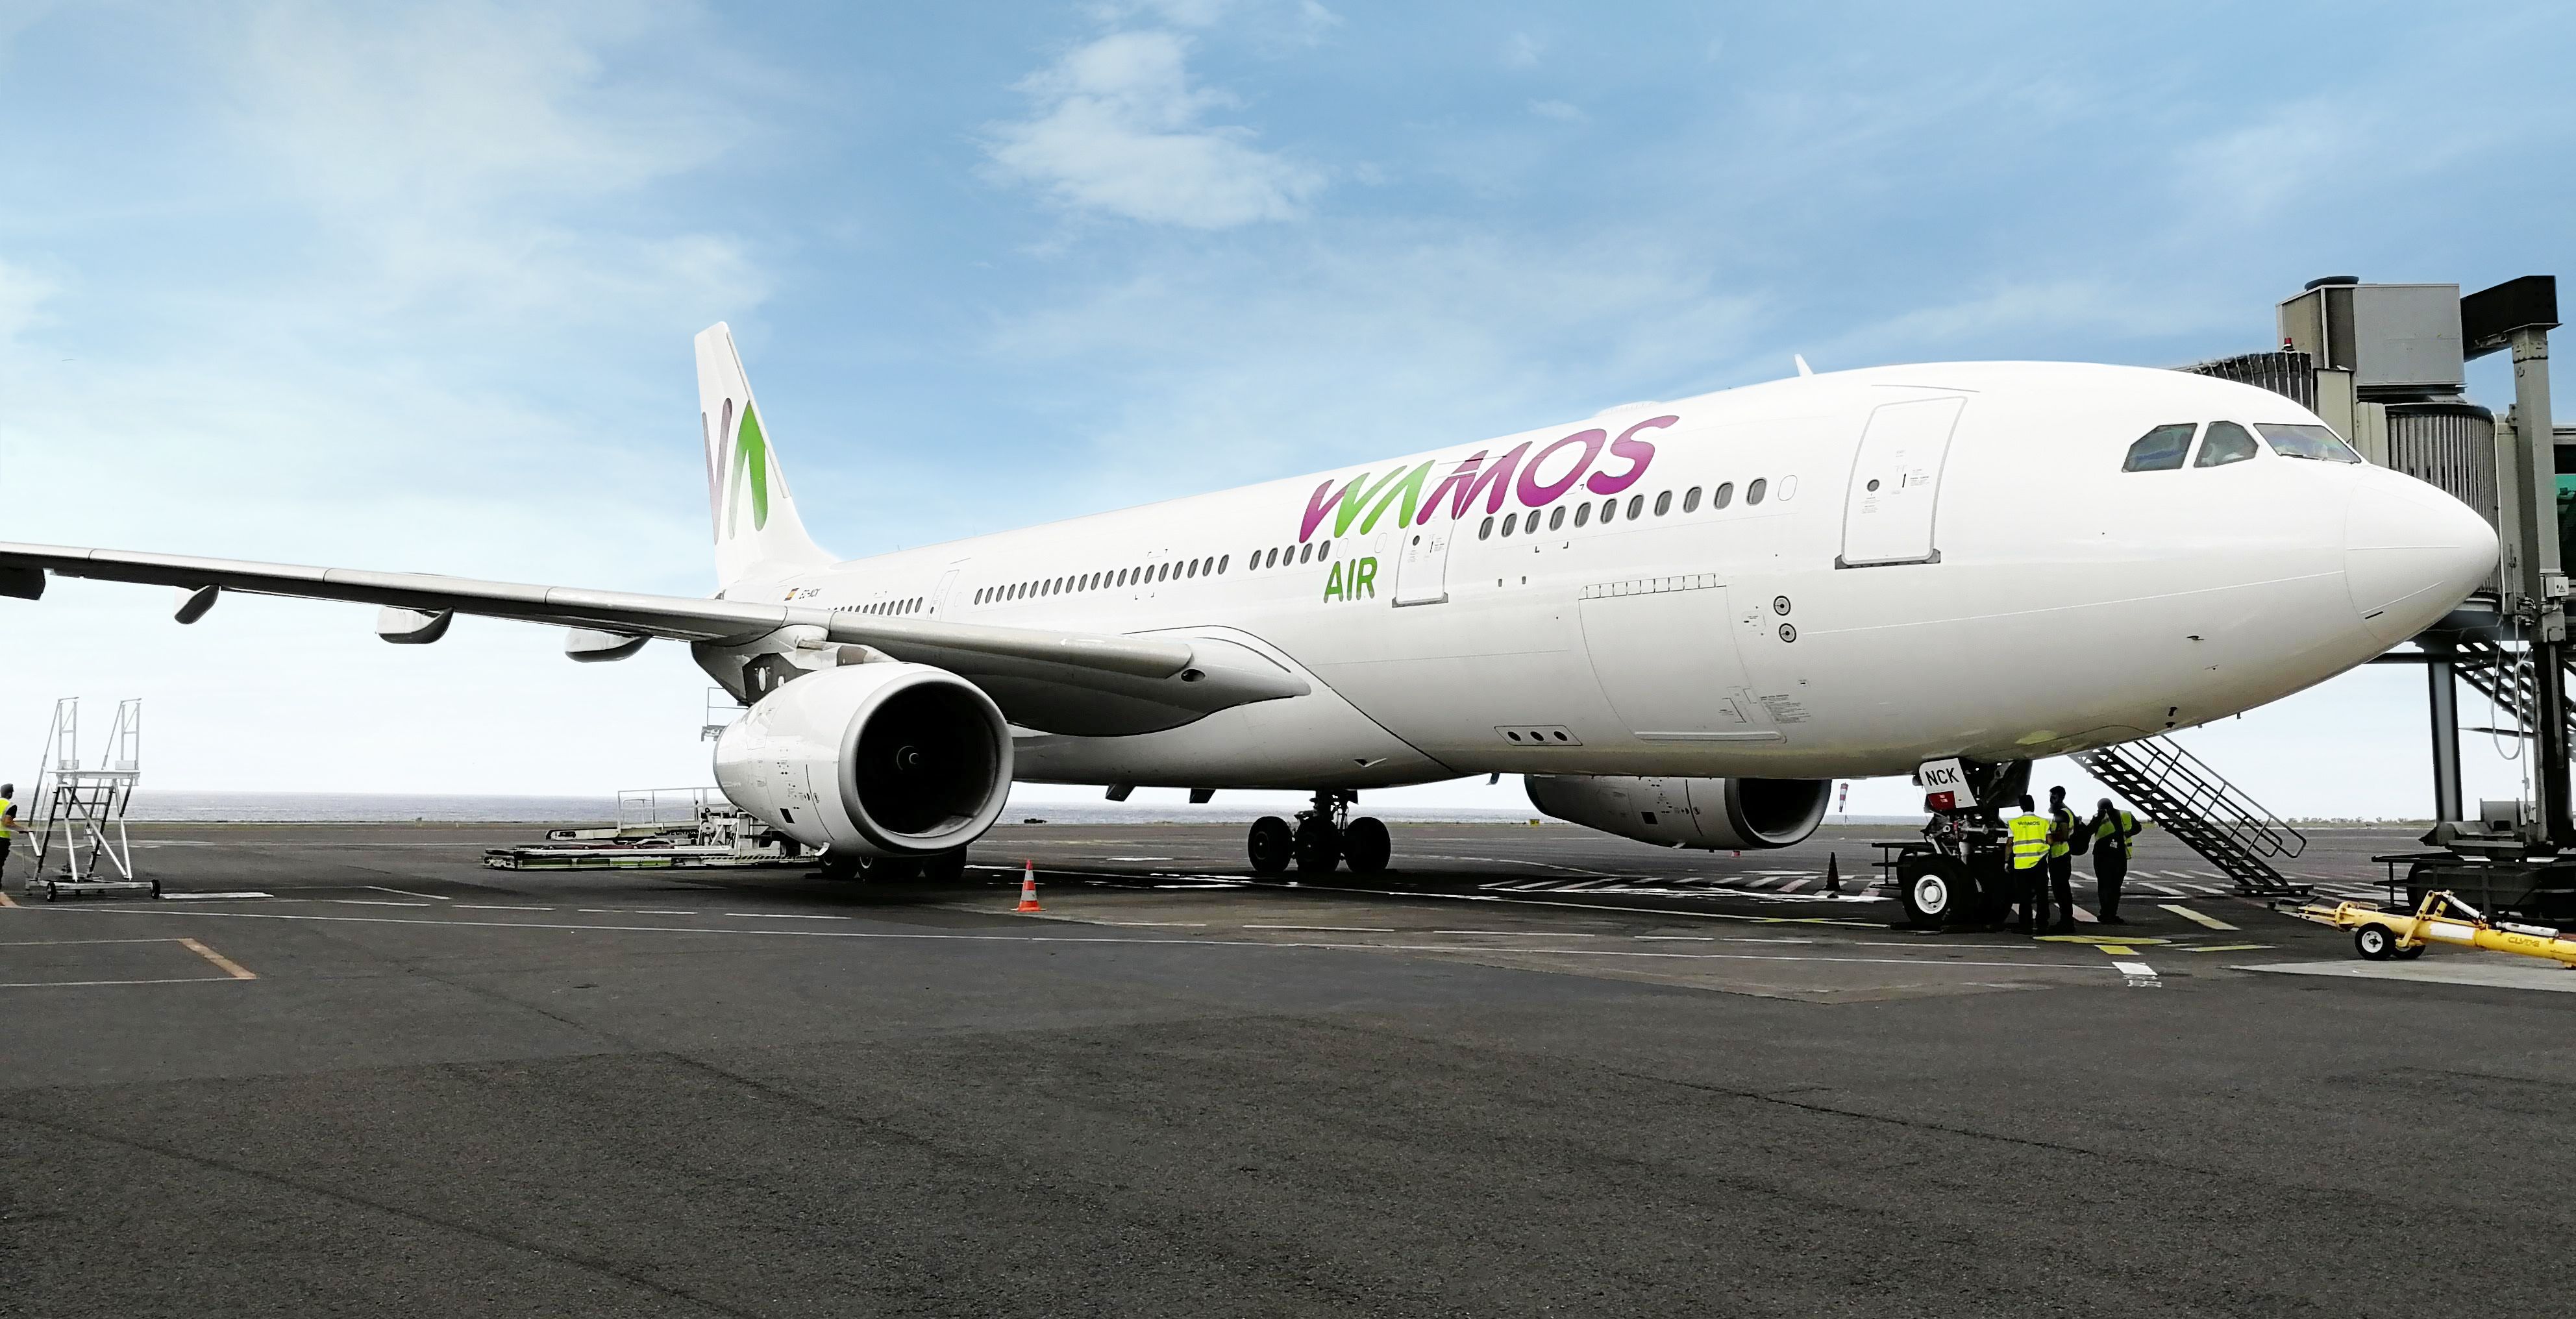 WAMOS AIR A330-200 wet-leased to Air New Zealand